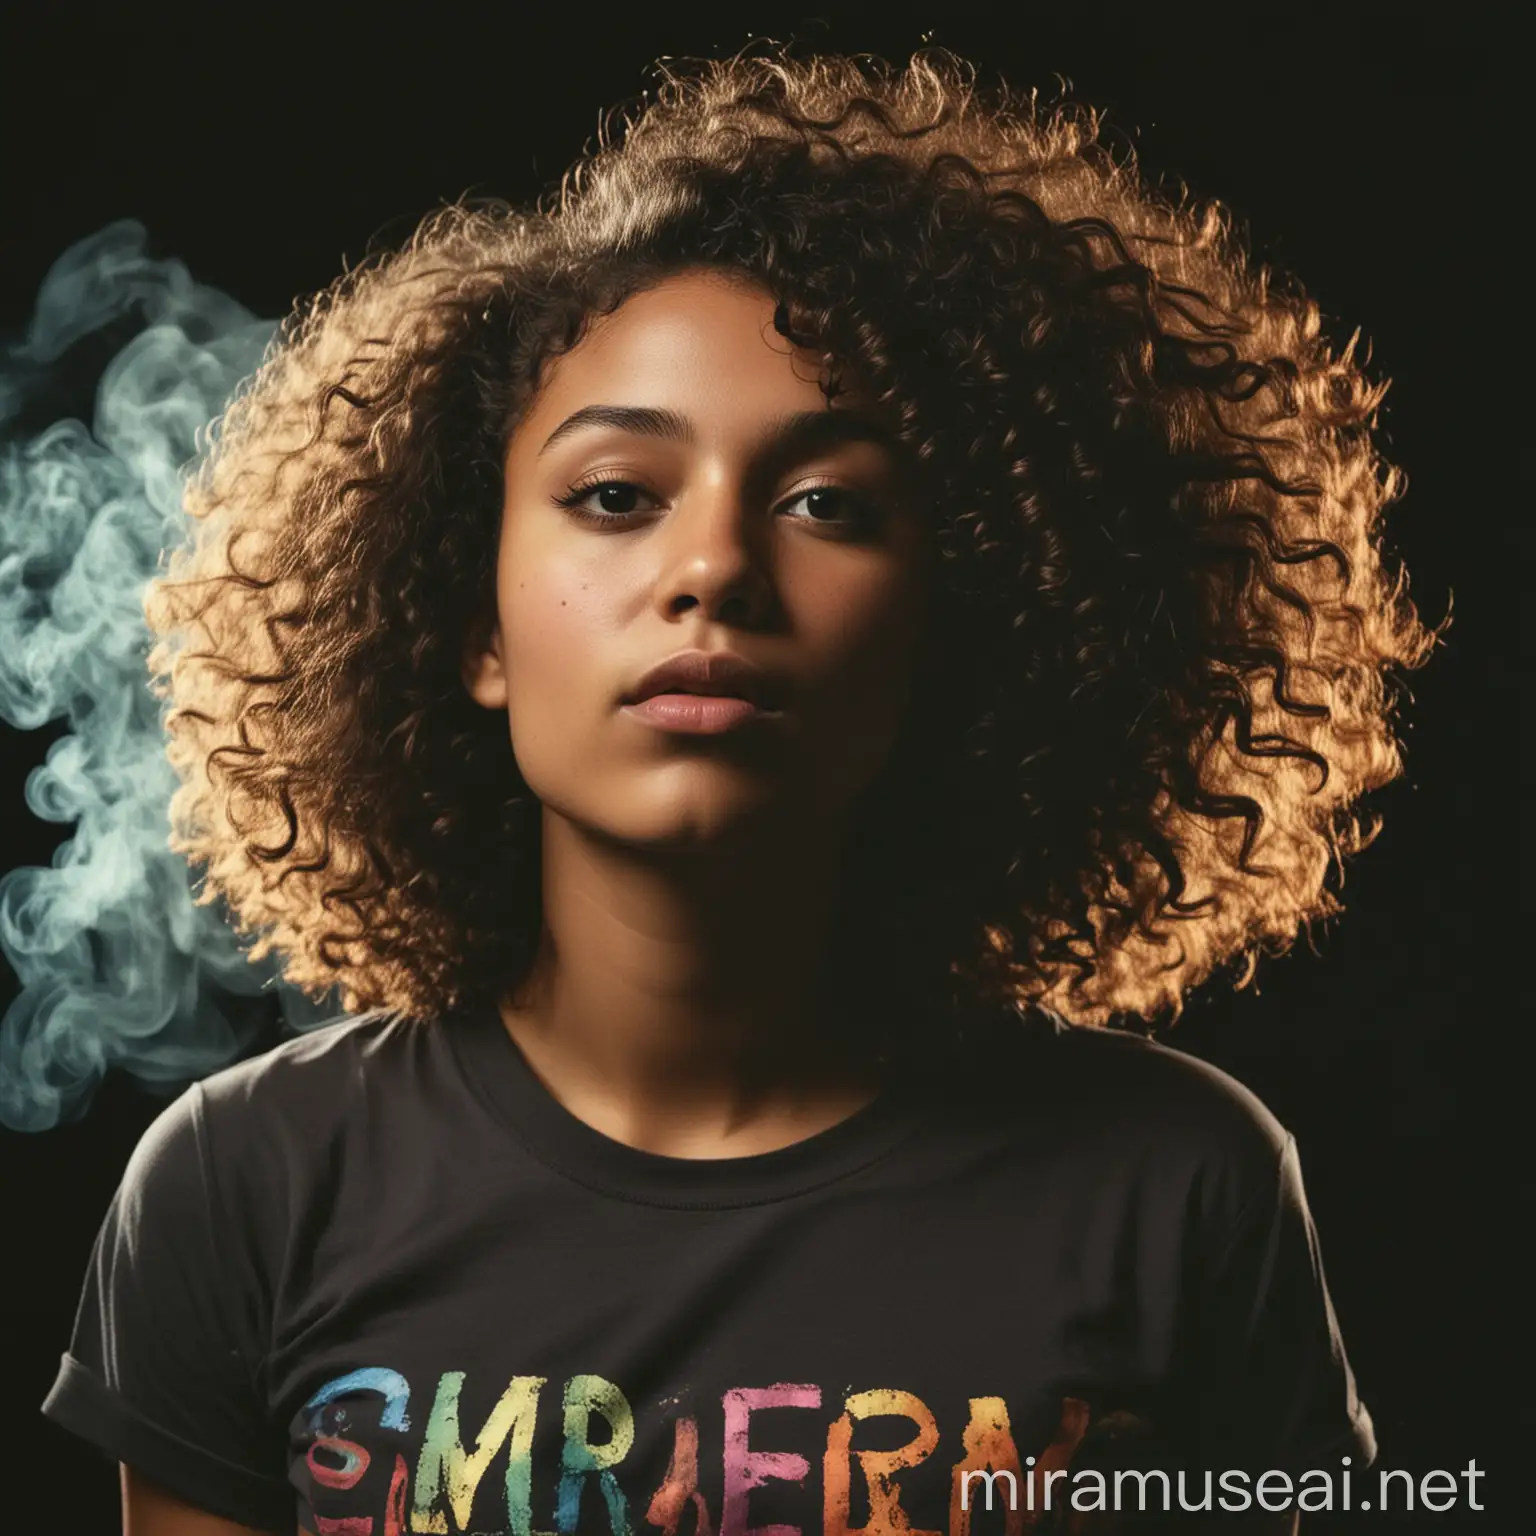 three-quarter medium portrait shot of a curly-haired young dark-skinned woman wearing a tshirt, looking up with black background and colorful smoke behind her. style is dark, noir and kodak gold 400.